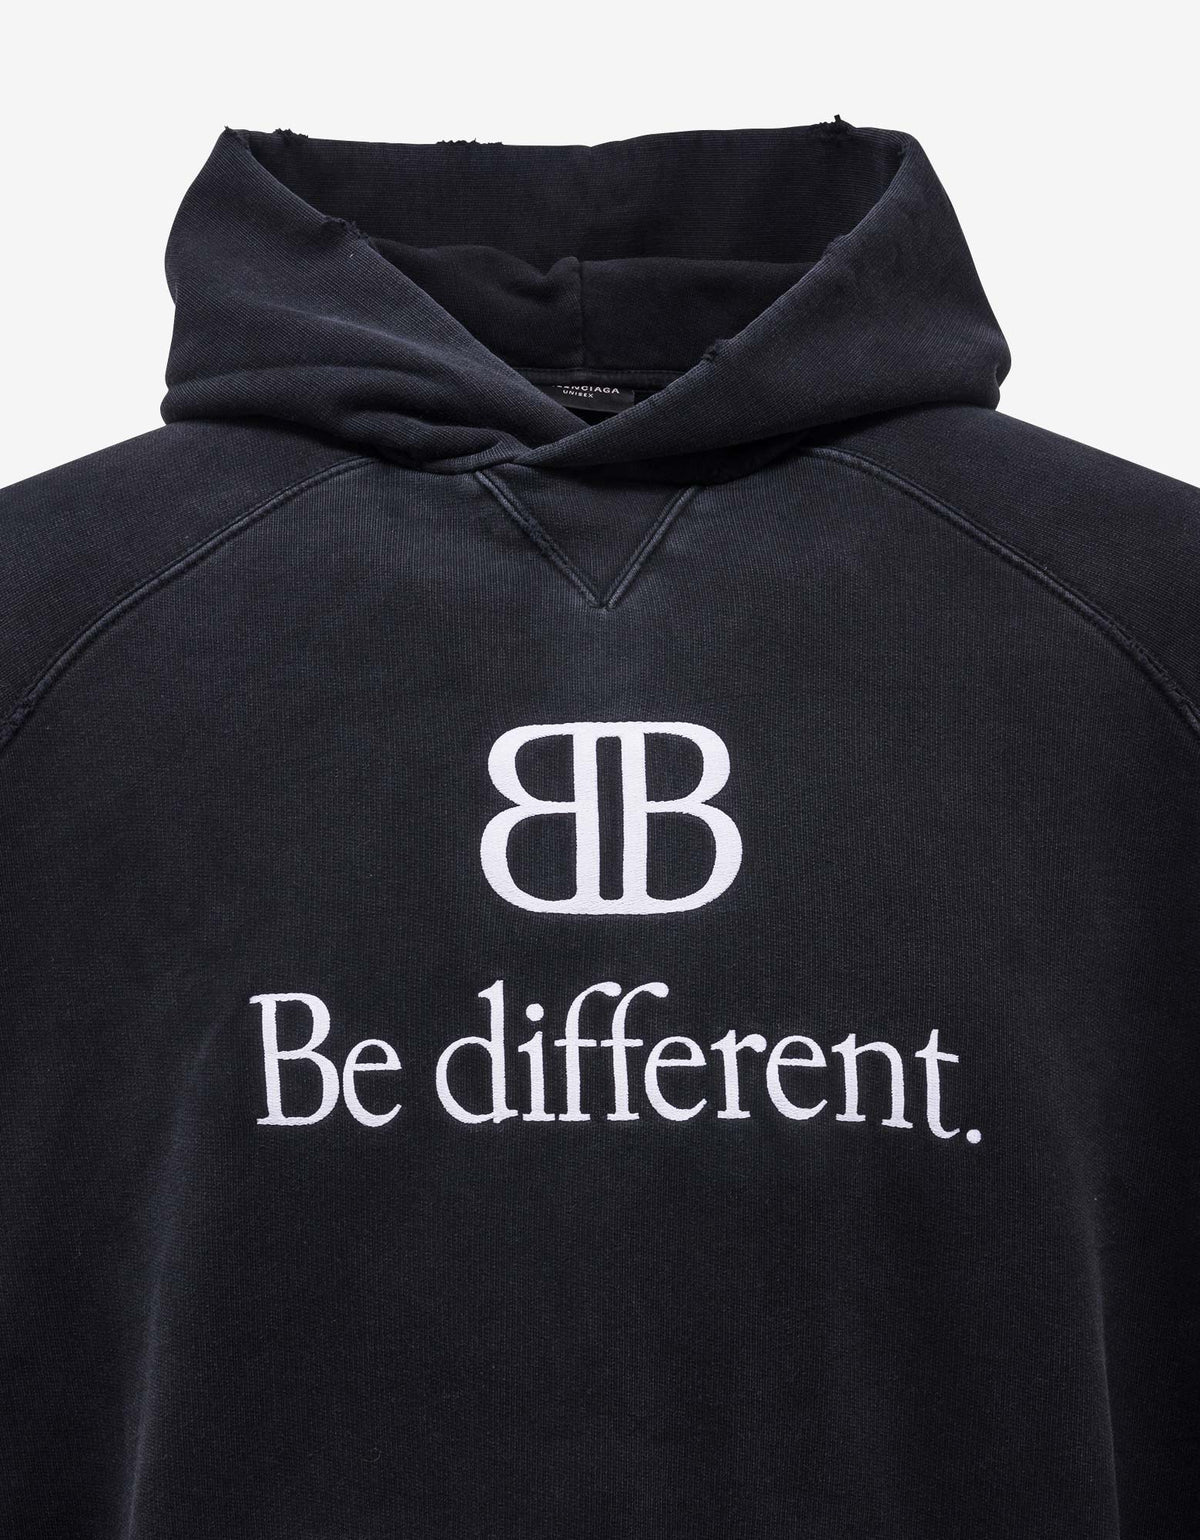 Balenciaga Black BB Be Different Patched T-Shirt Hoodie